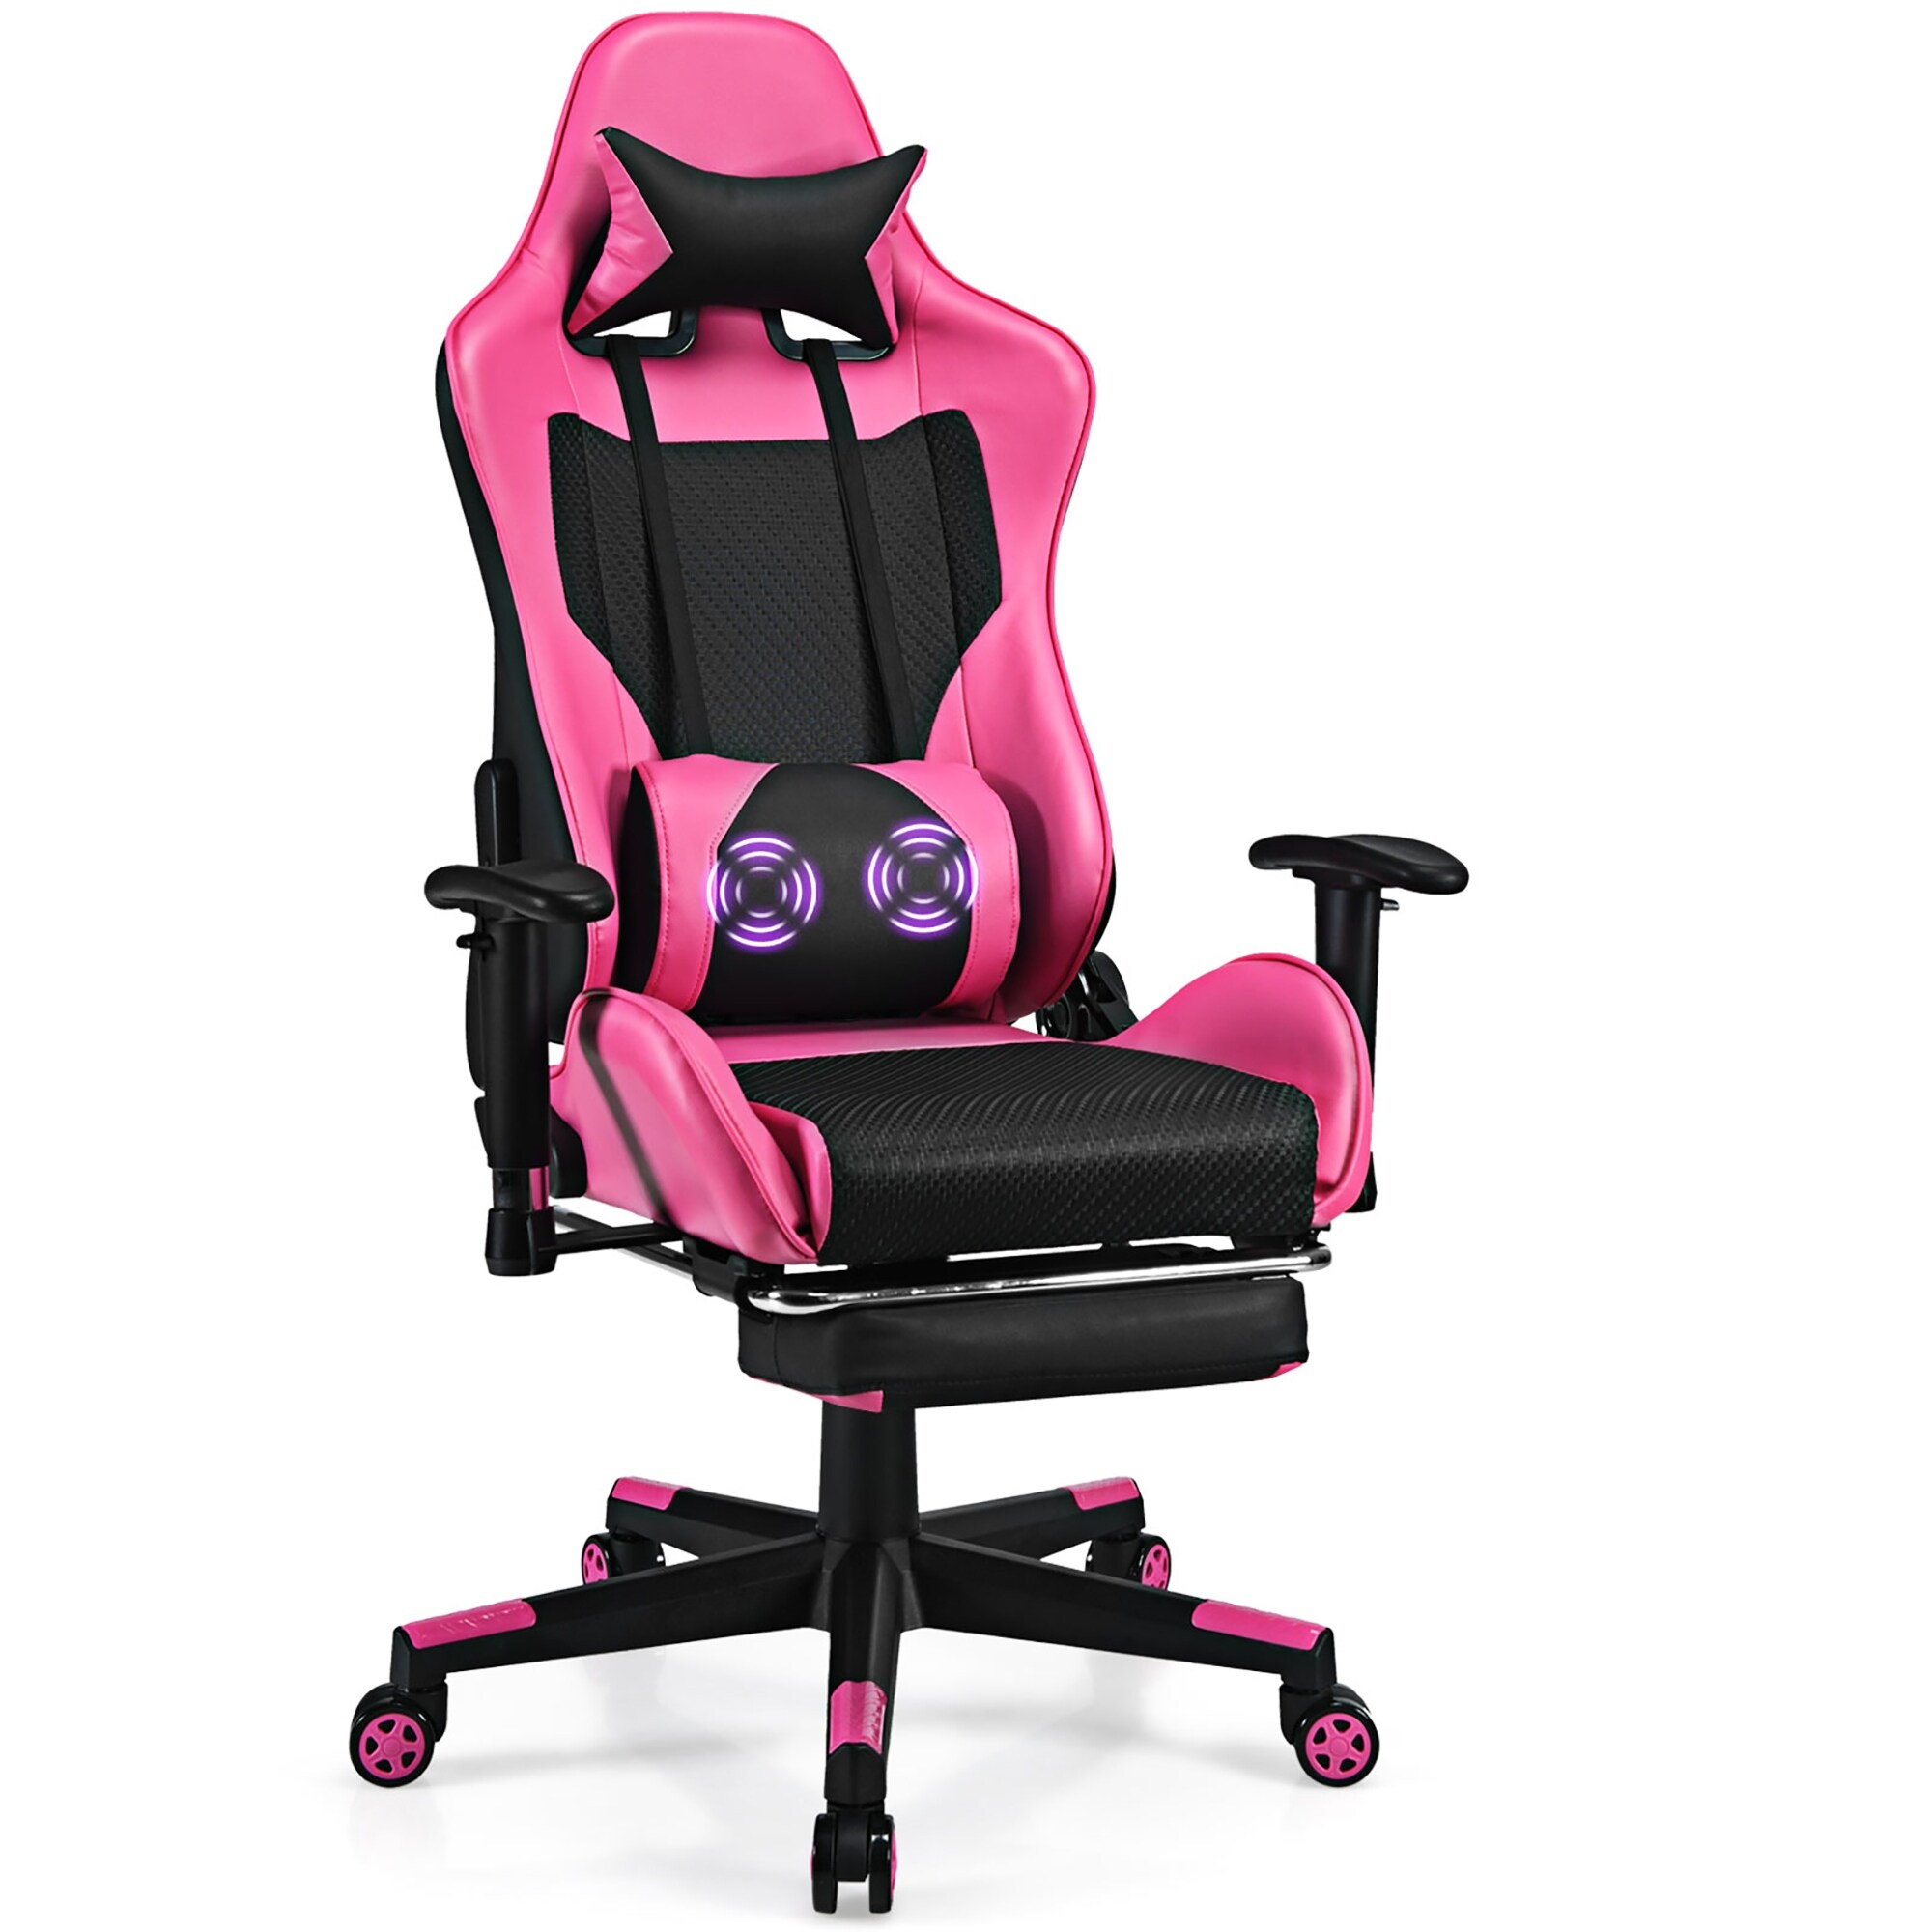 https://ak1.ostkcdn.com/images/products/is/images/direct/09c60be1e9318d802ad53e7c1b83a4137667289e/Gaming-Chair-Massage-Office-Chair-Computer-Gaming-Racing-Chair.jpg